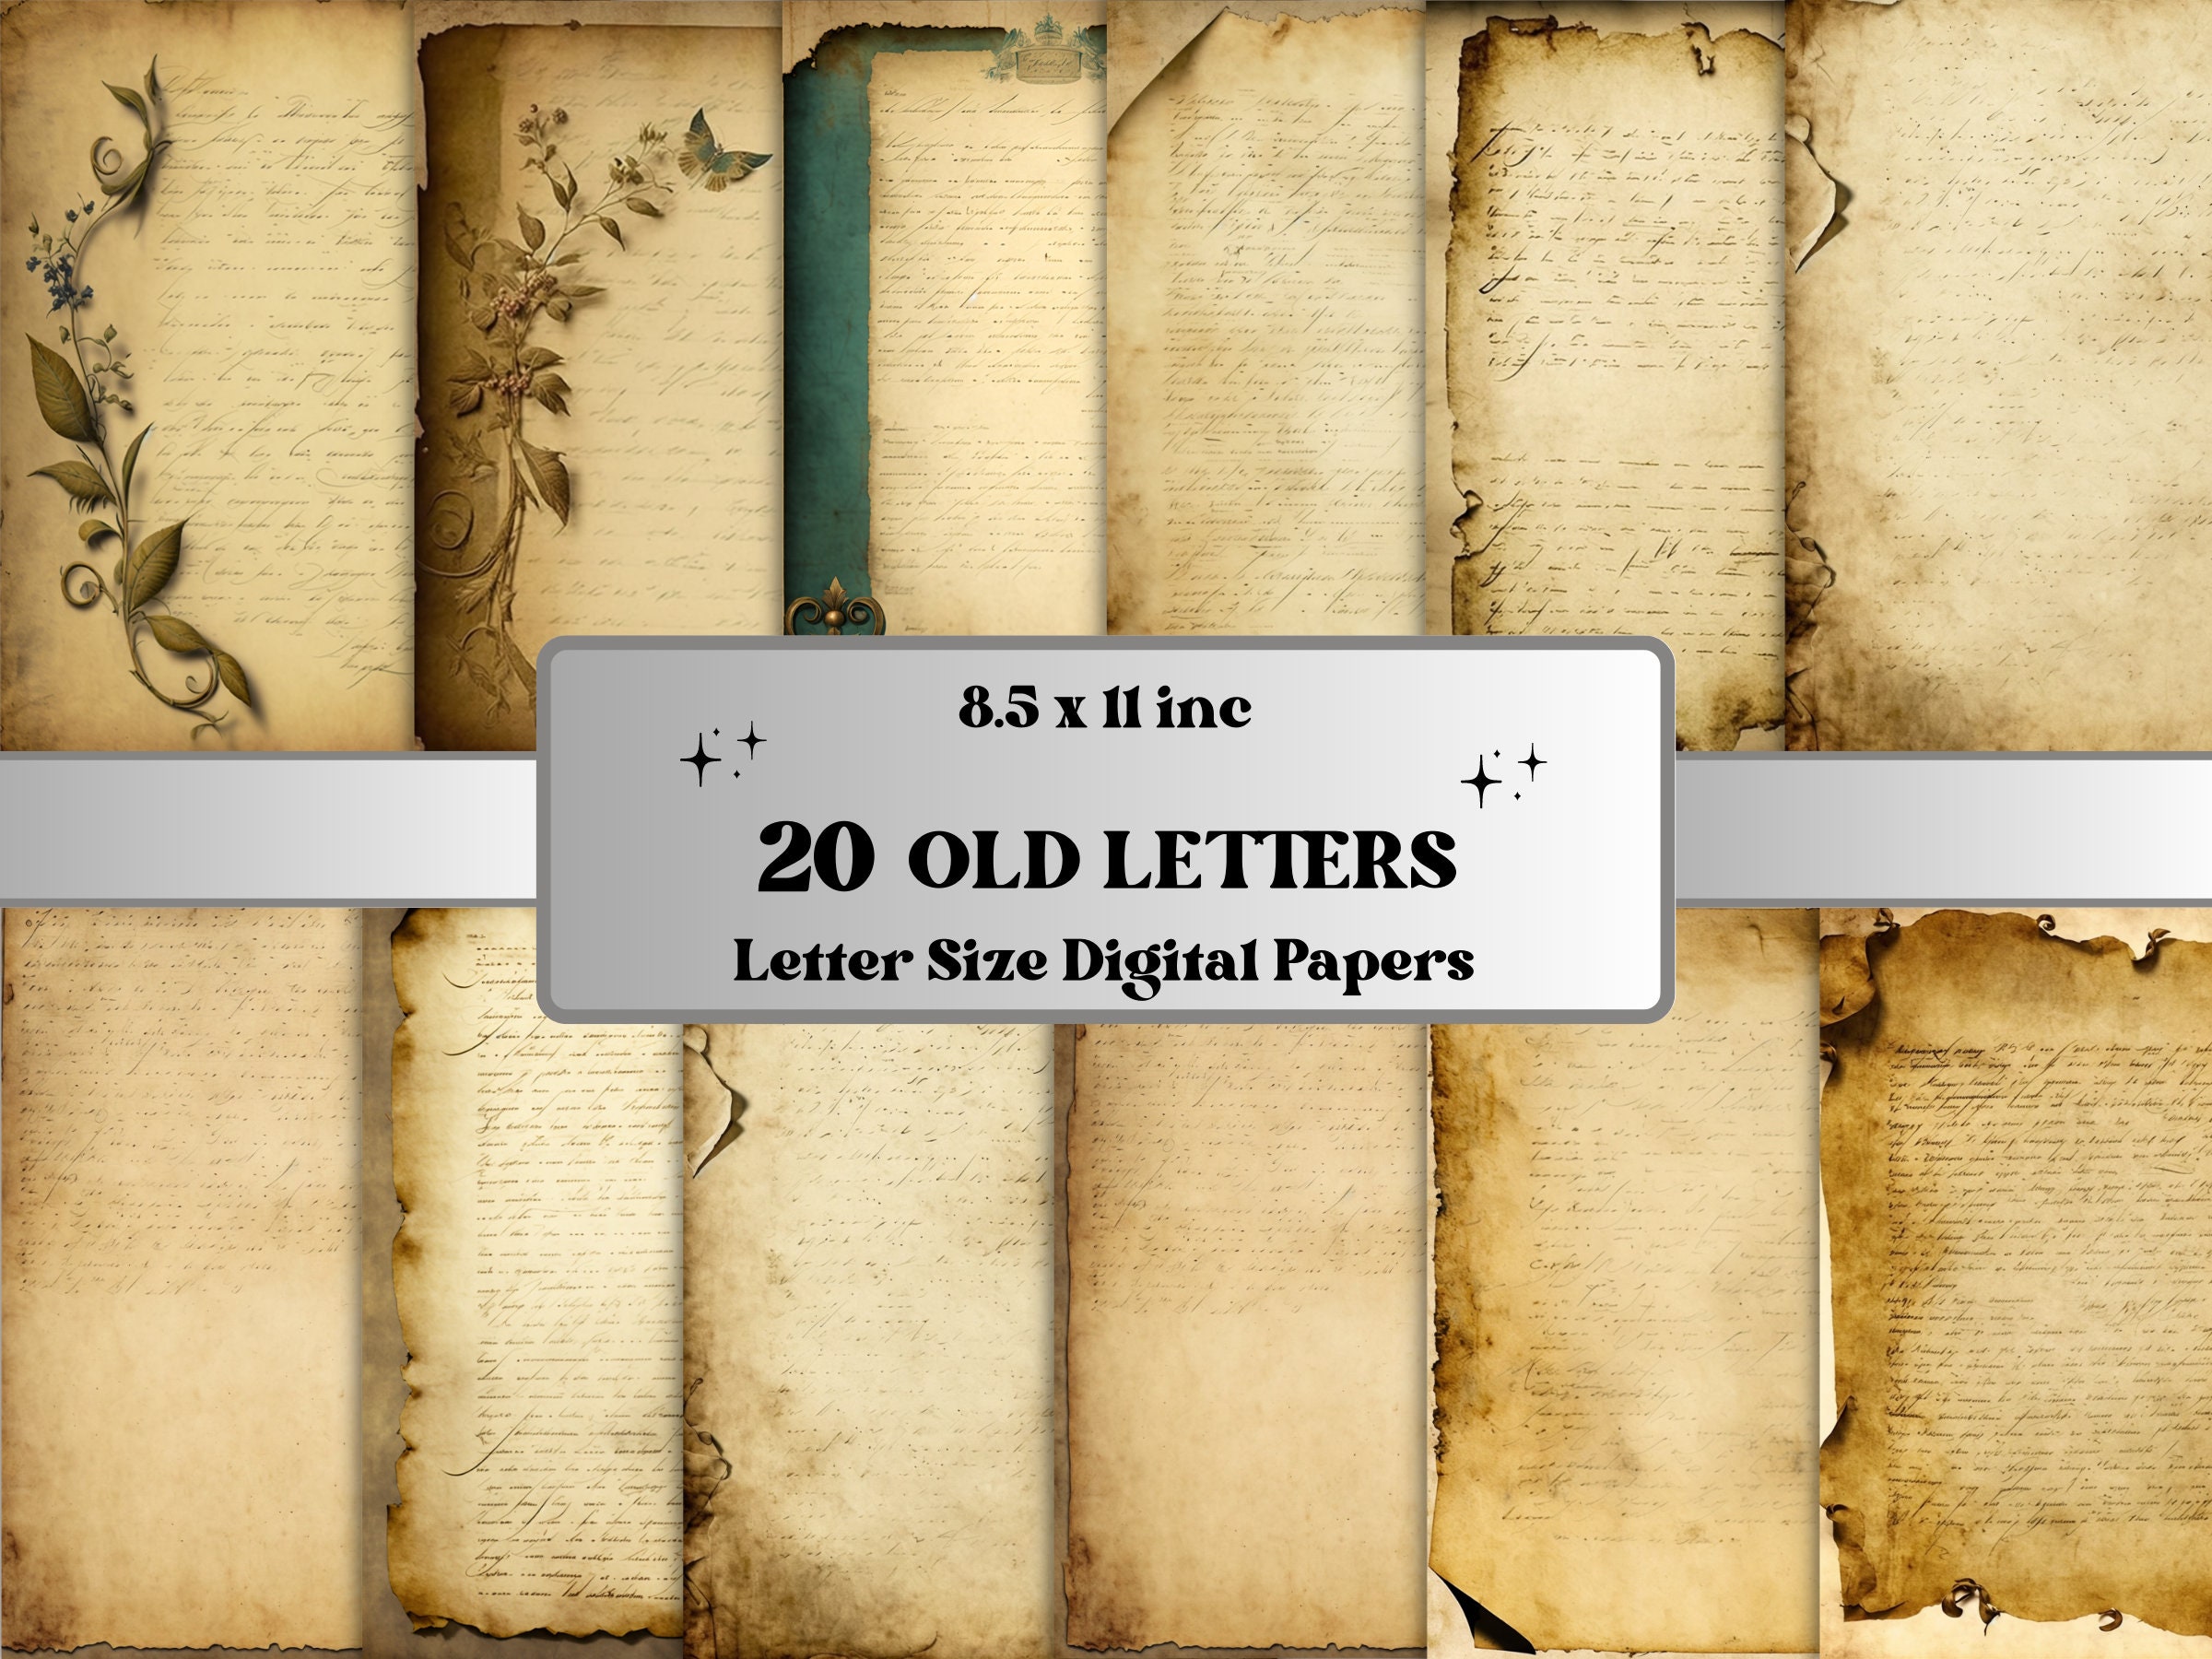 48-Pack Vintage-Style Lined Stationary Paper for Writing Letters, Antique,  Old Fashioned Paper, Aged Fancy Lined Paper, Ivory with Gold Border (Letter  Size, 8.5 x 11 In)